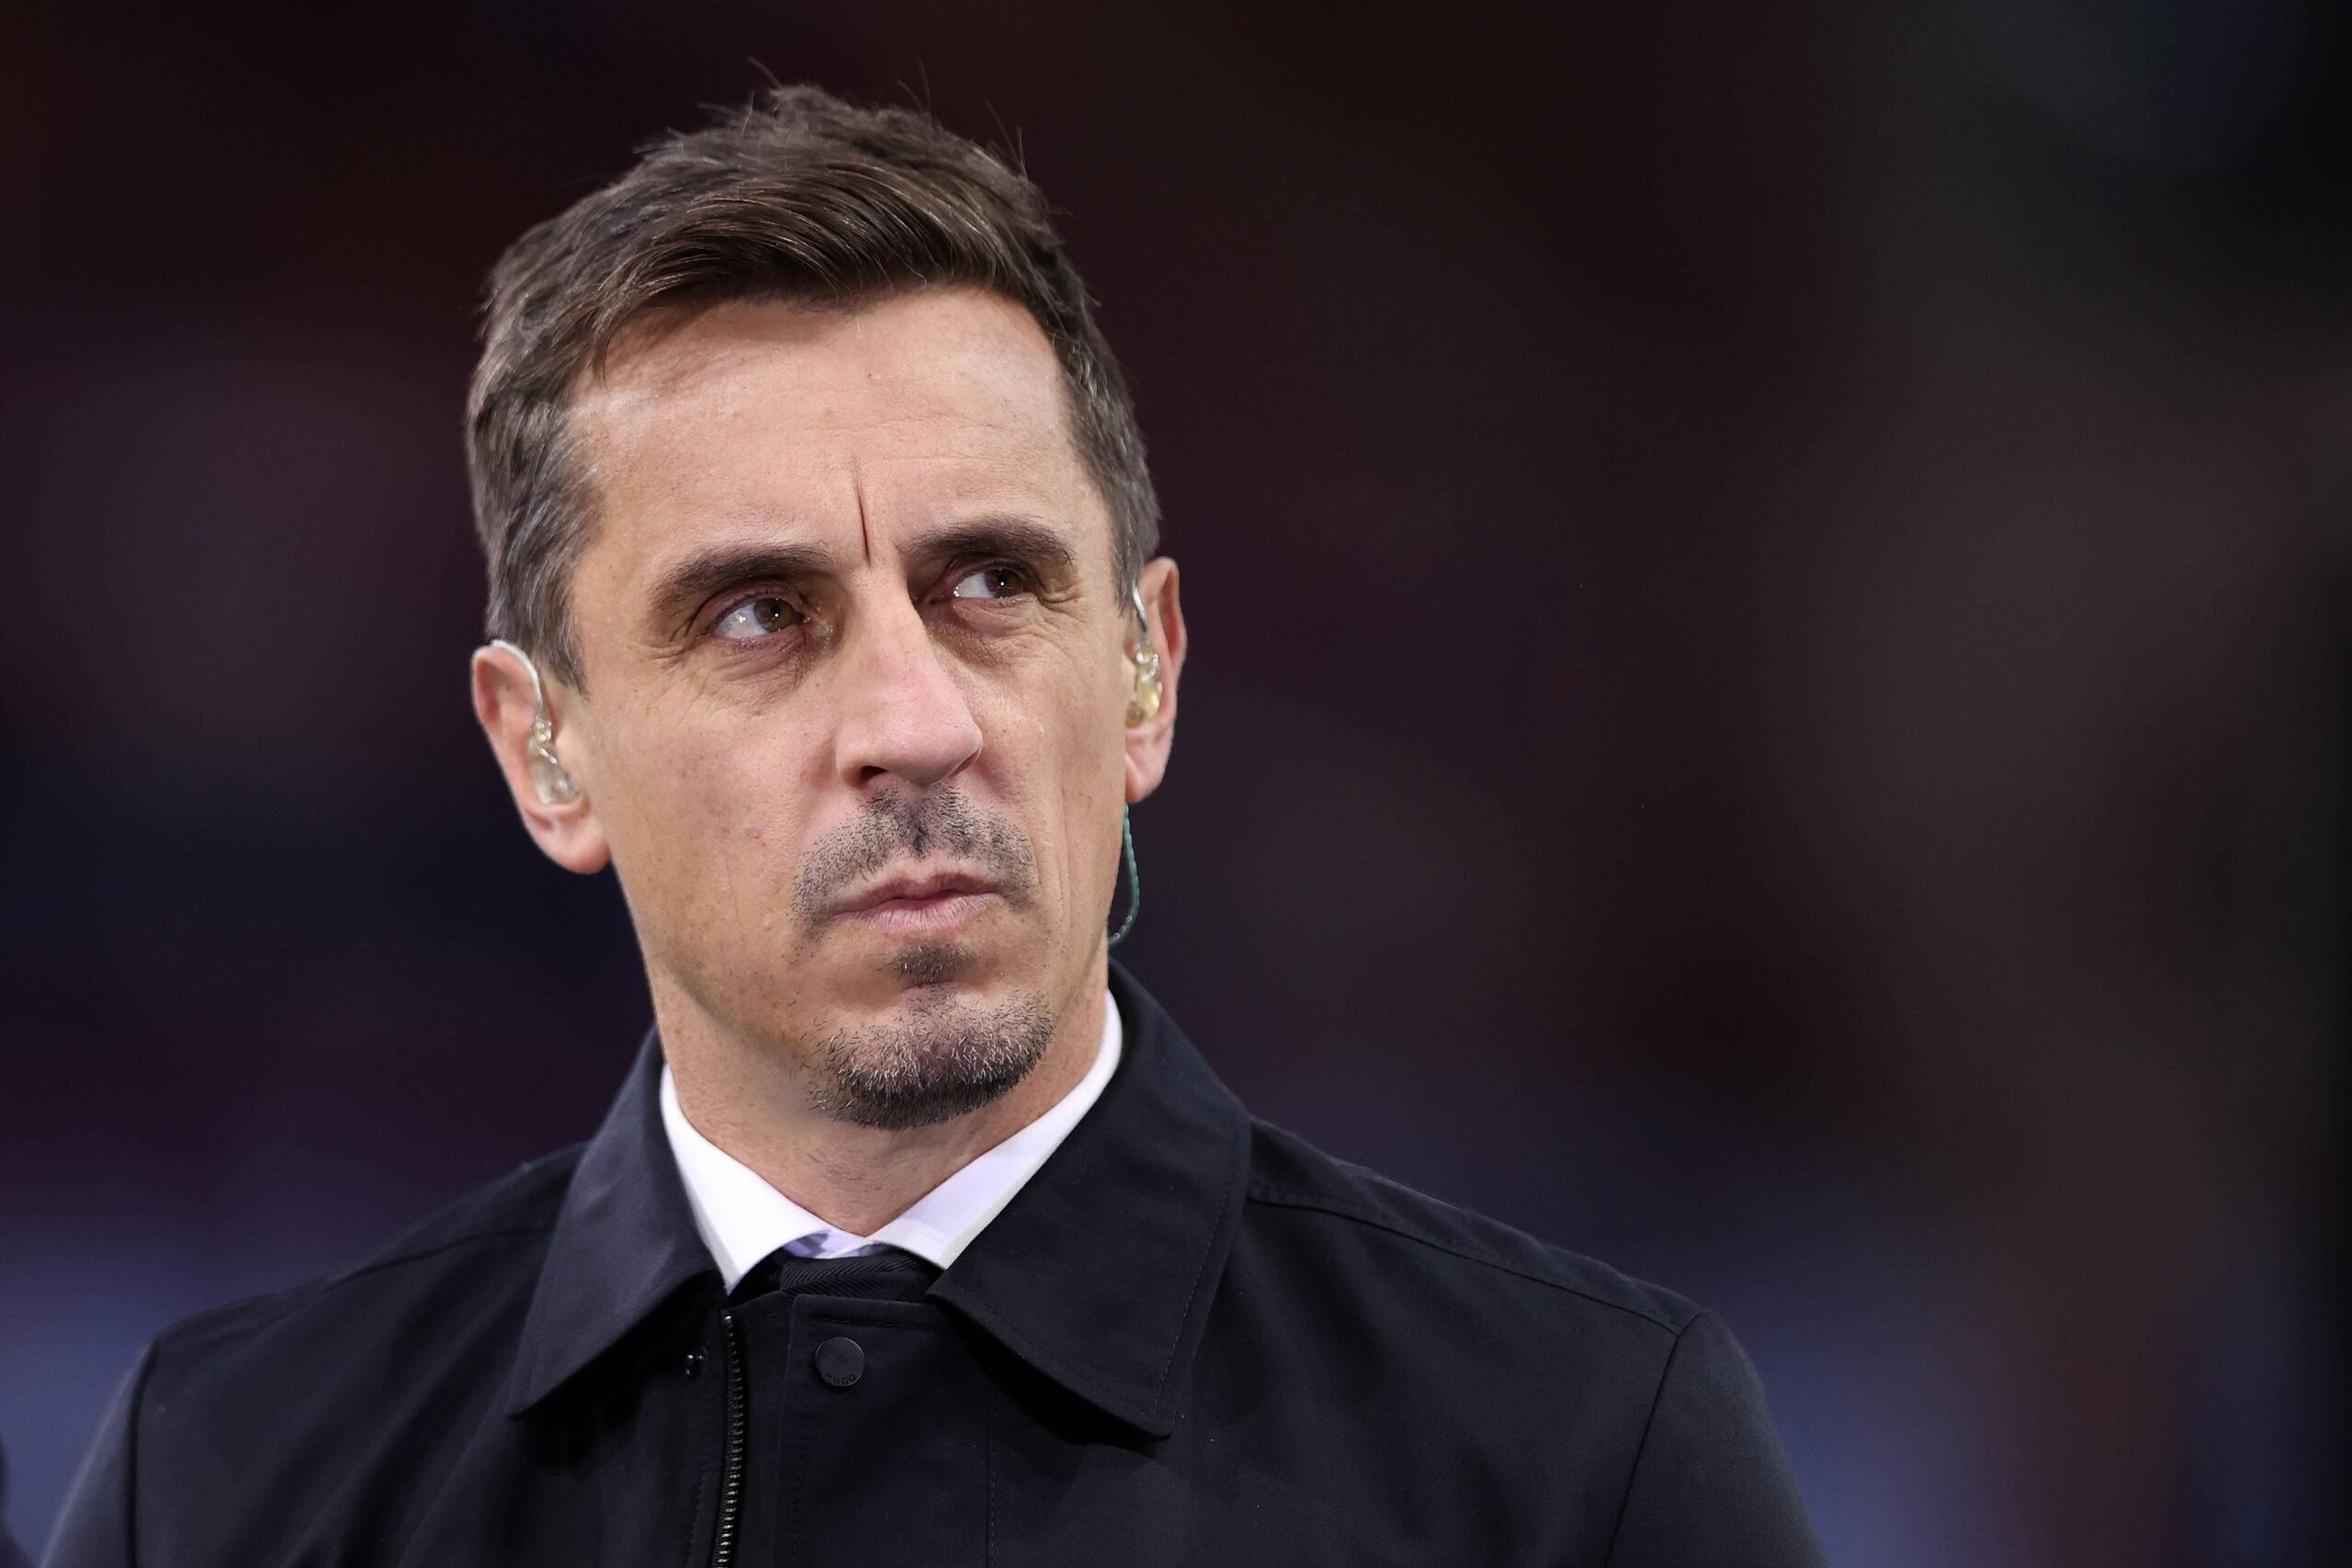 Gary Neville stares into crowd